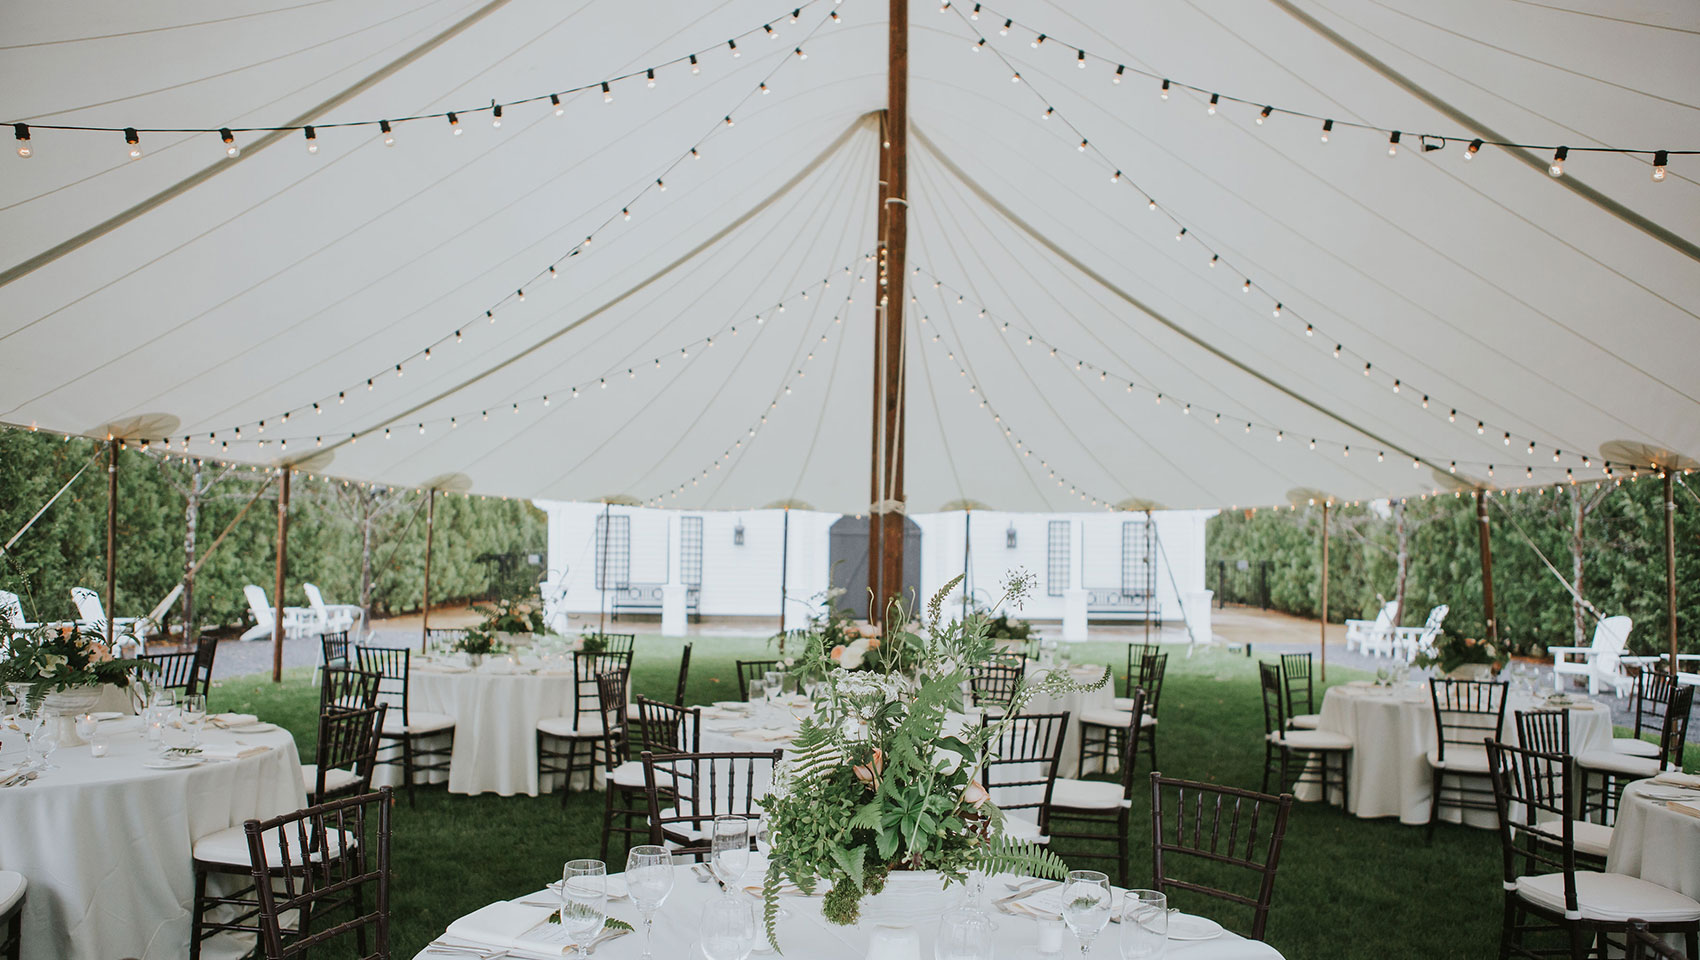 Tented Weddings On The Green